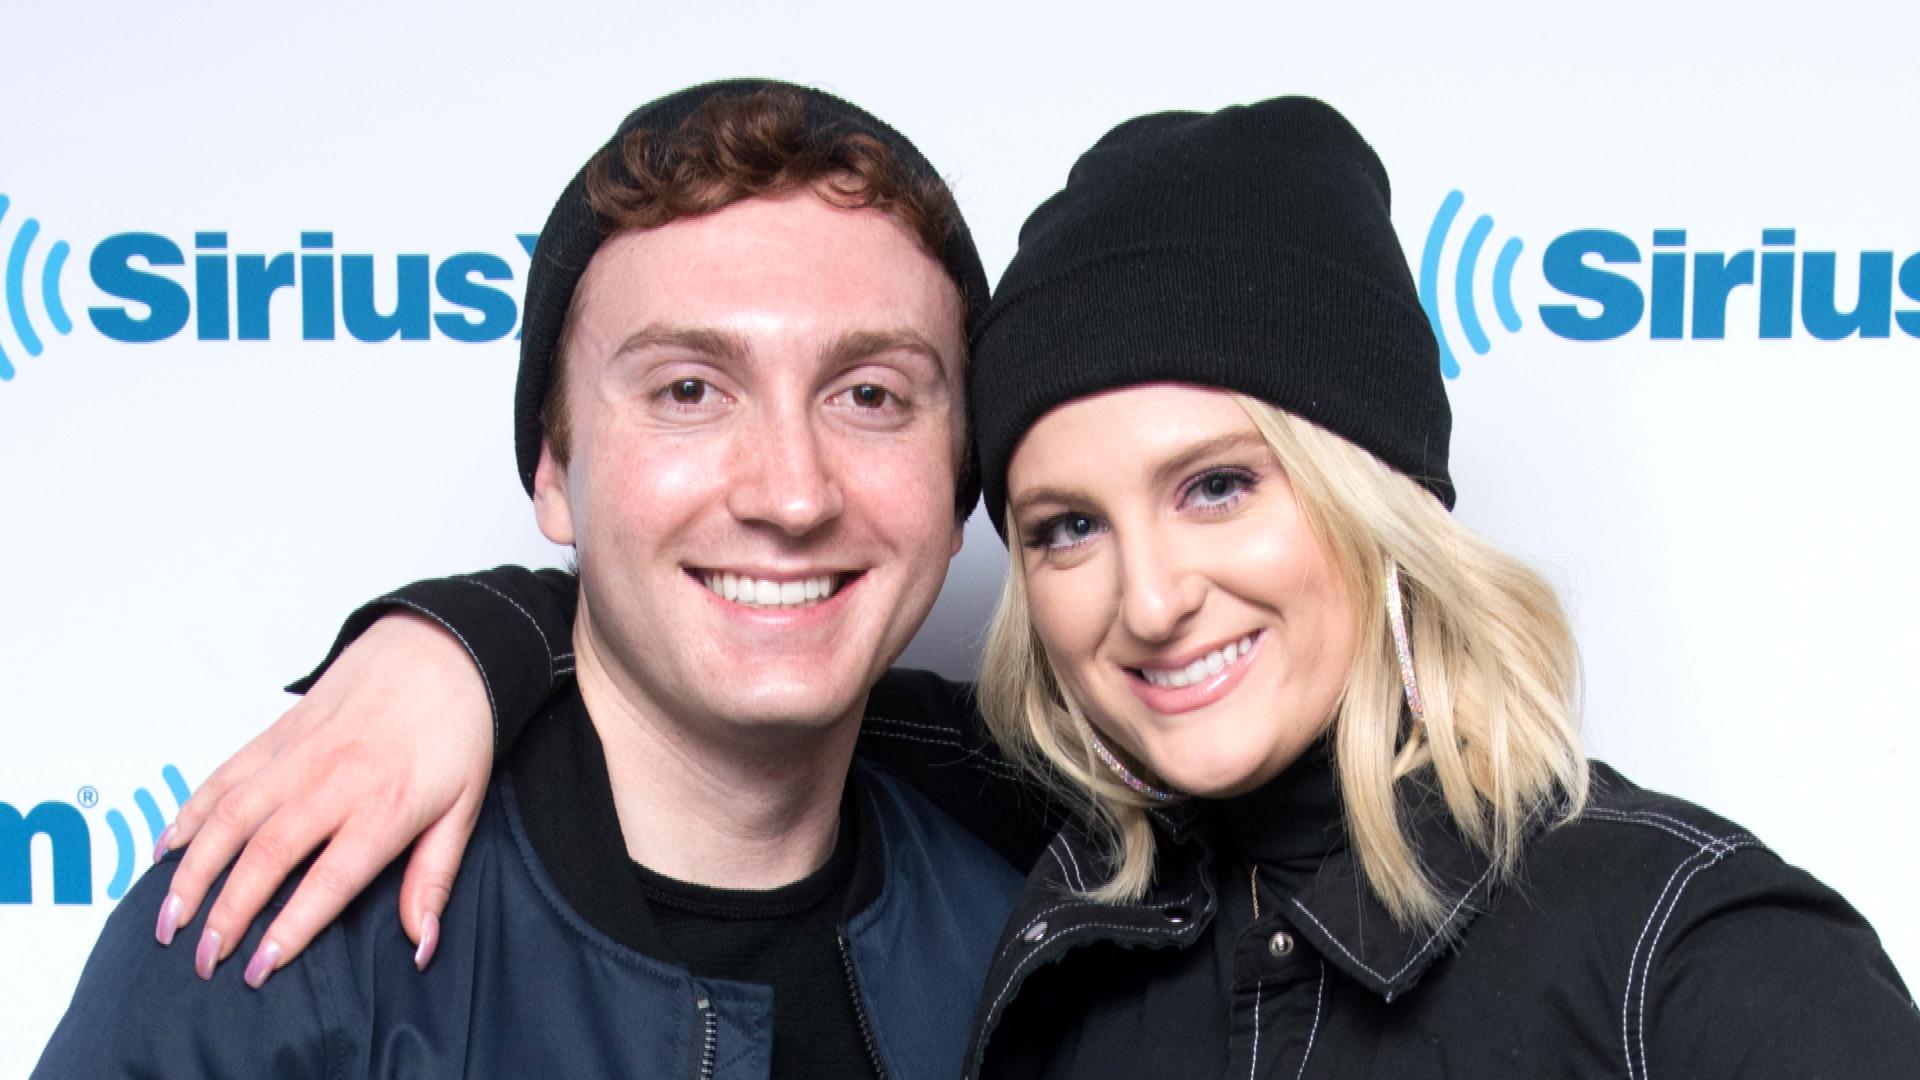 Meghan Trainor's Toddler Son Is a Merry 'Superstar' in His Mom's Latest  Music Video